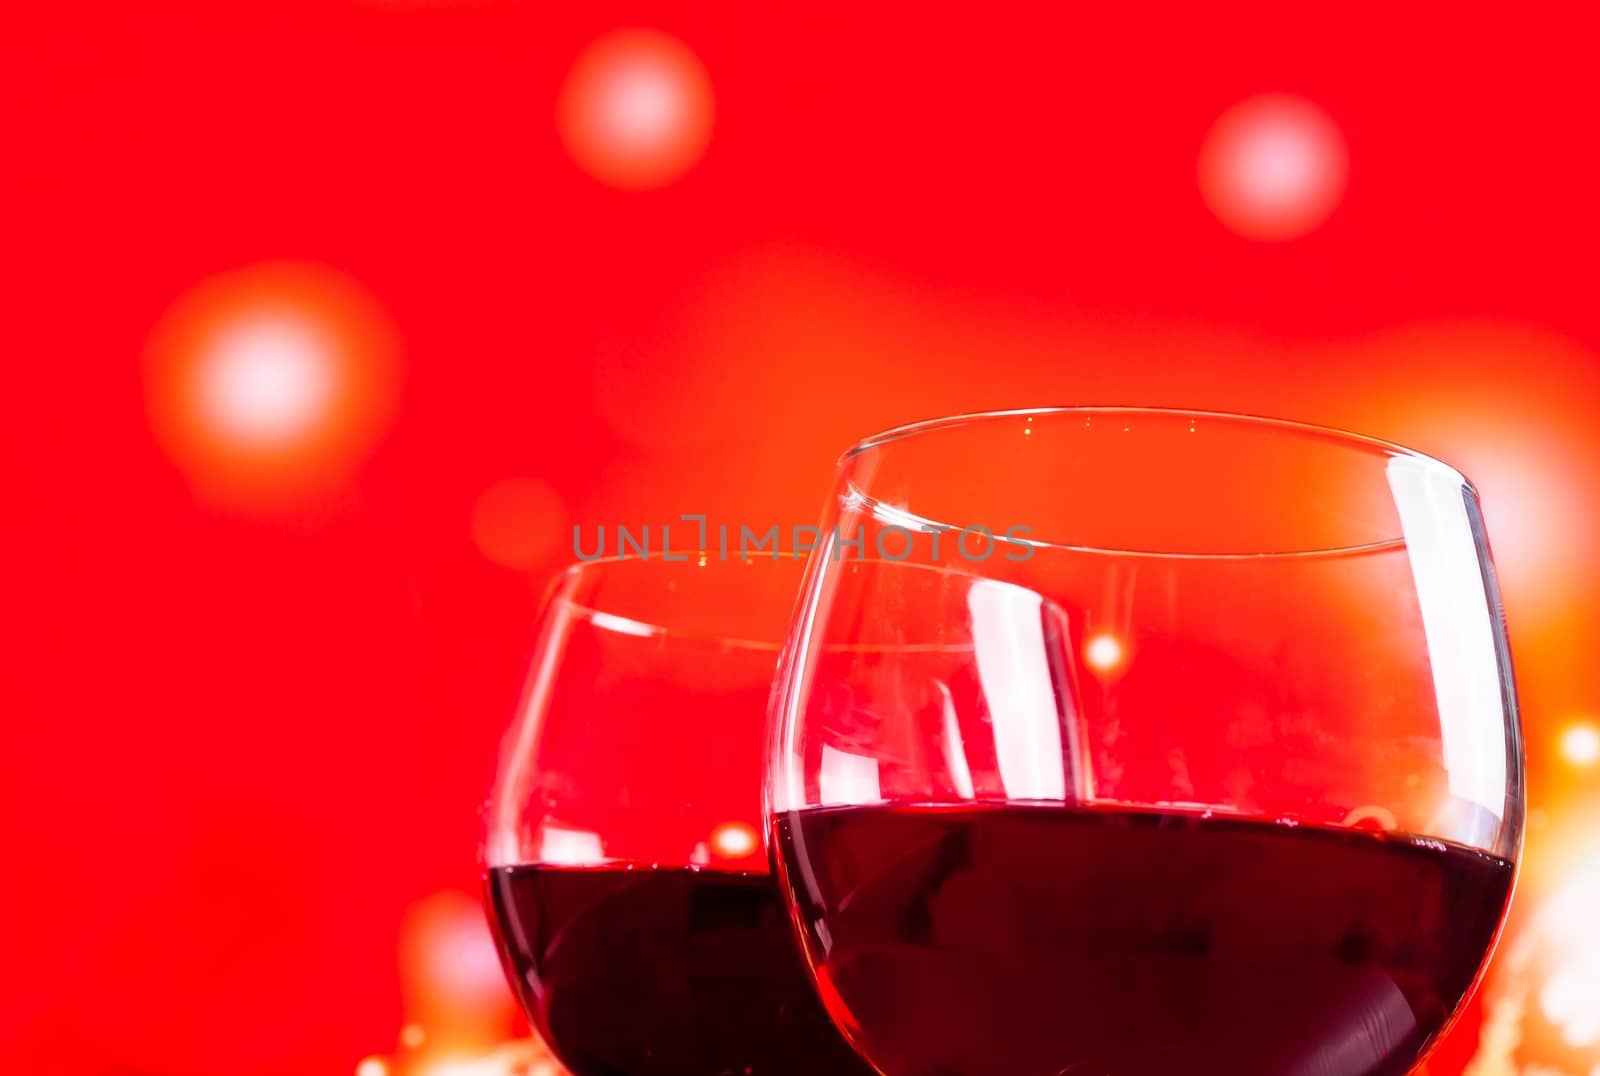 two red wine glasses near the bottle against red lights background, festive and fun concept